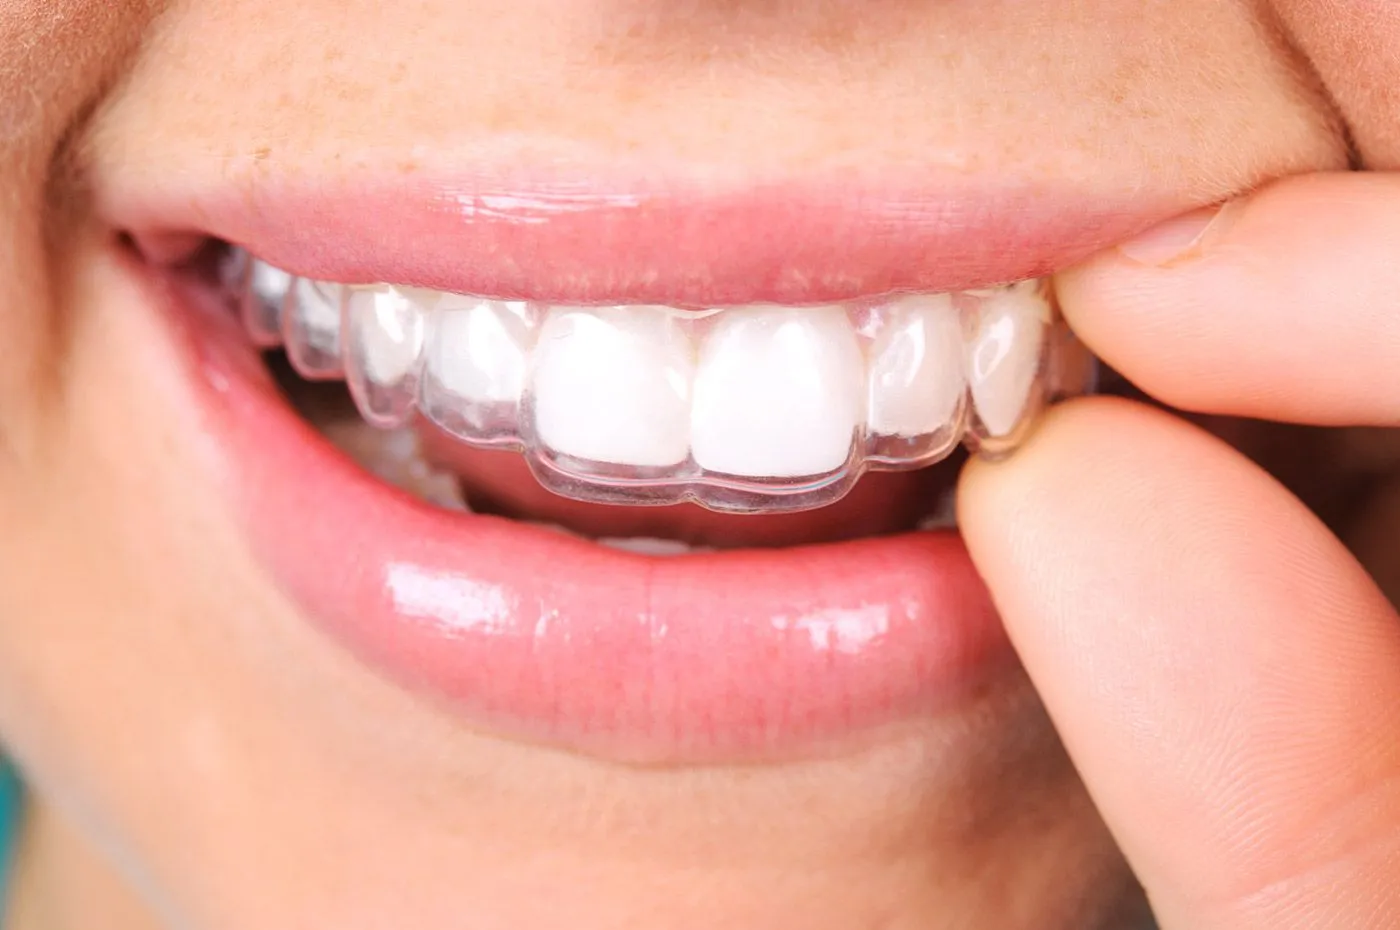 Clear dental aligners on teeth, close-up view.